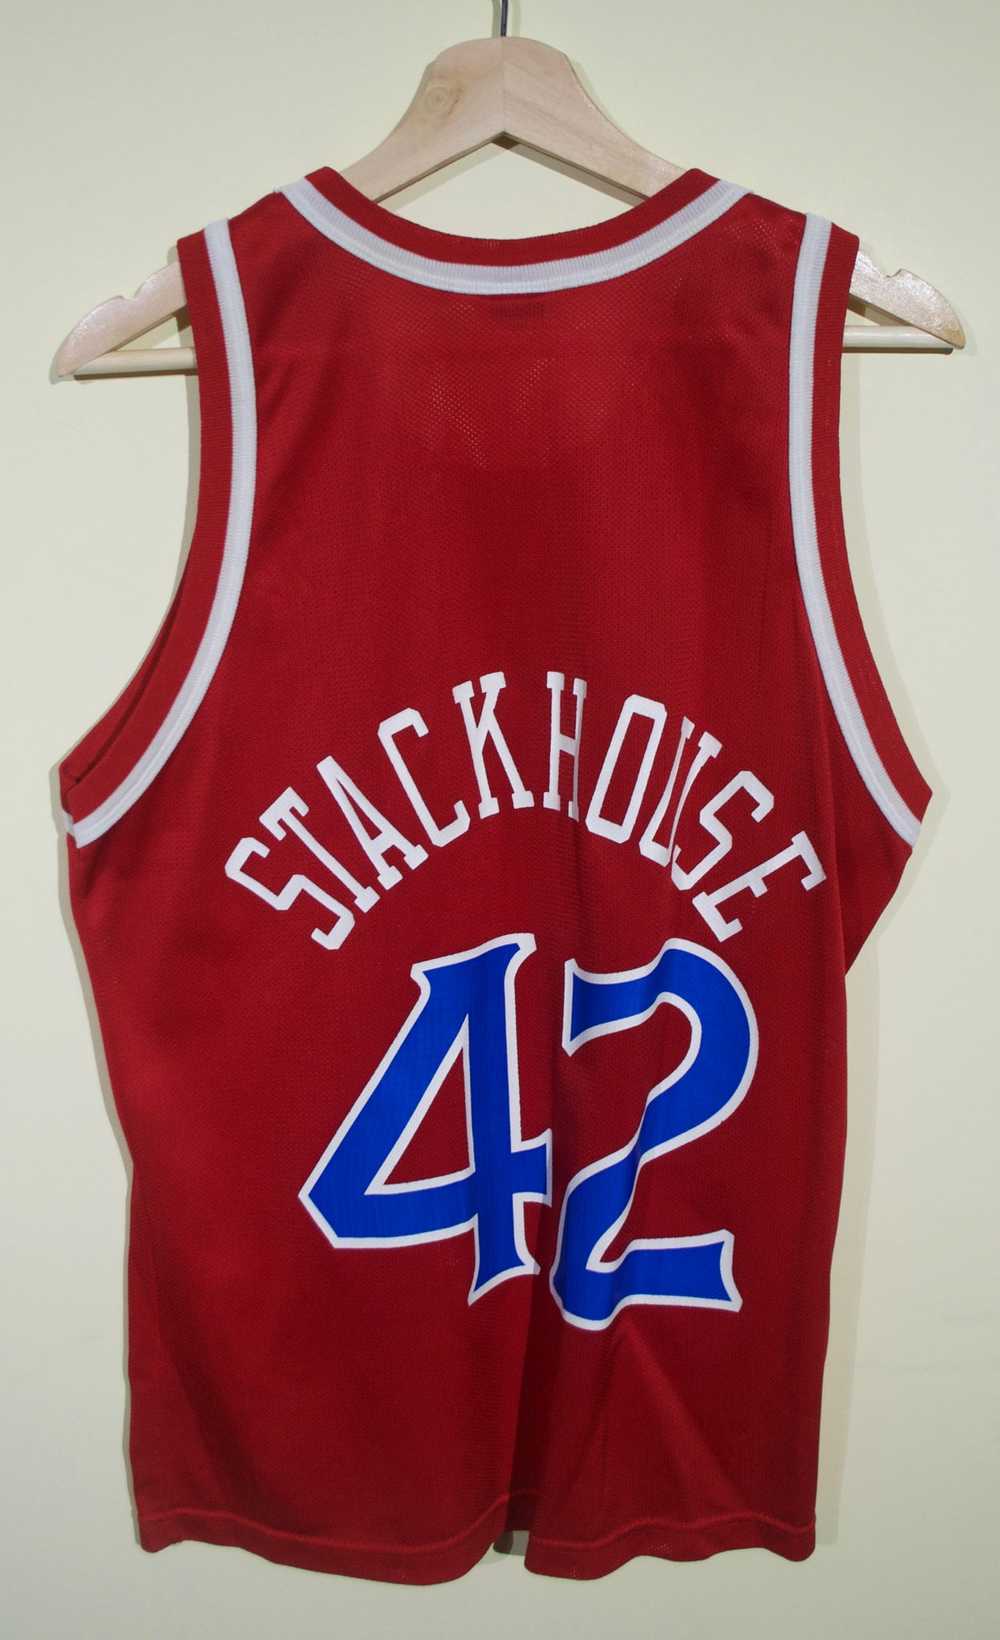 Jerry Stackhouse Sixers Jersey sz 40/M - image 2